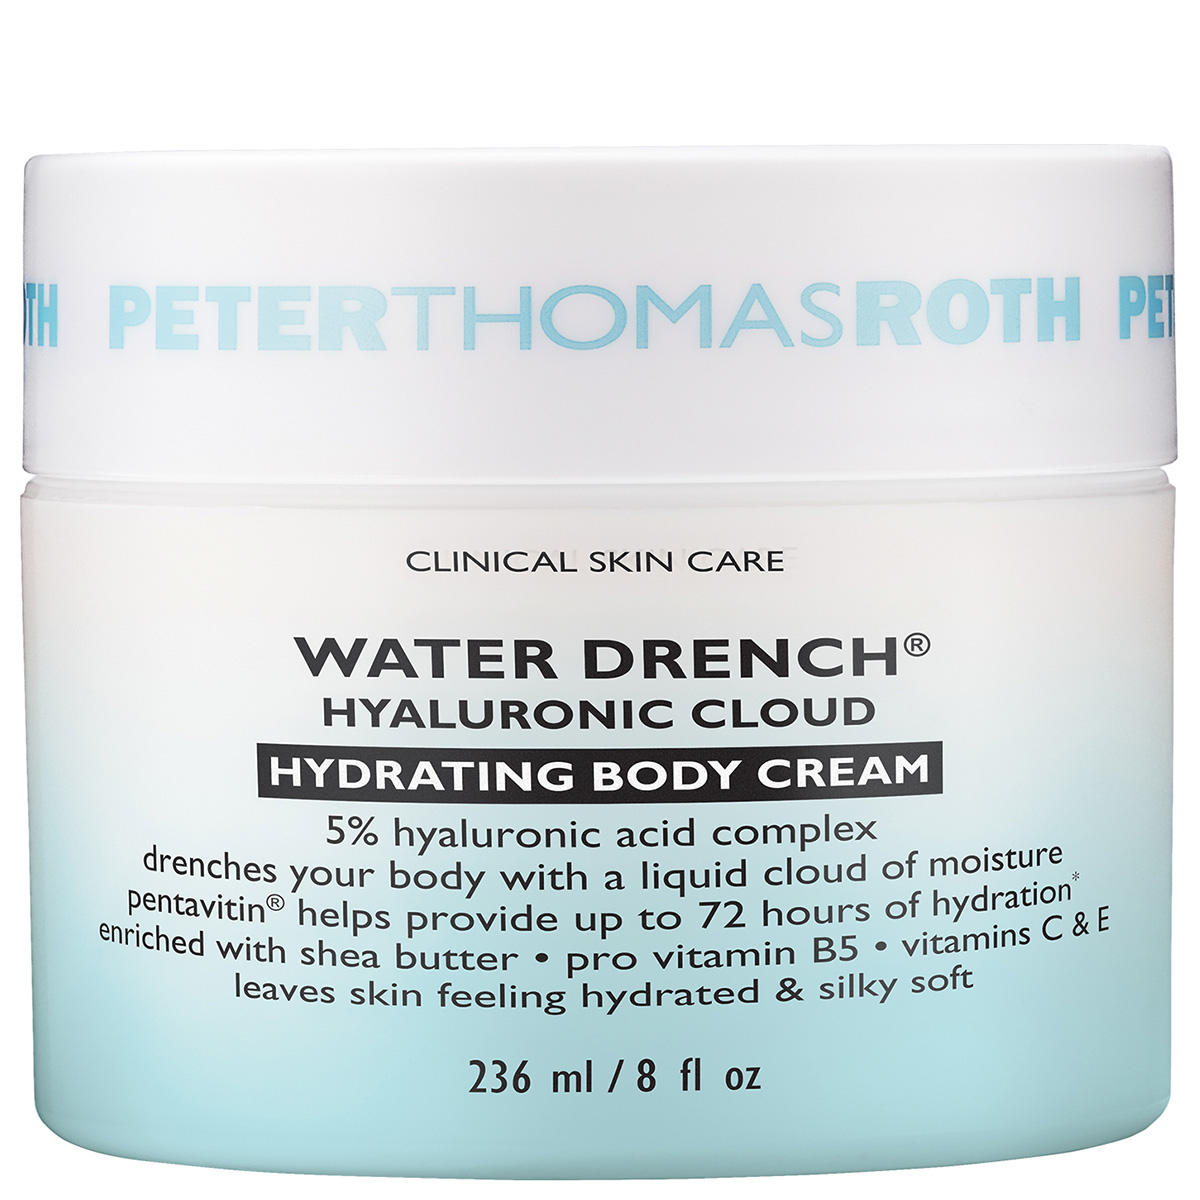 PETER THOMAS ROTH CLINICAL SKIN CARE Water Drench Hydrating Body Cream 236 ml - 2